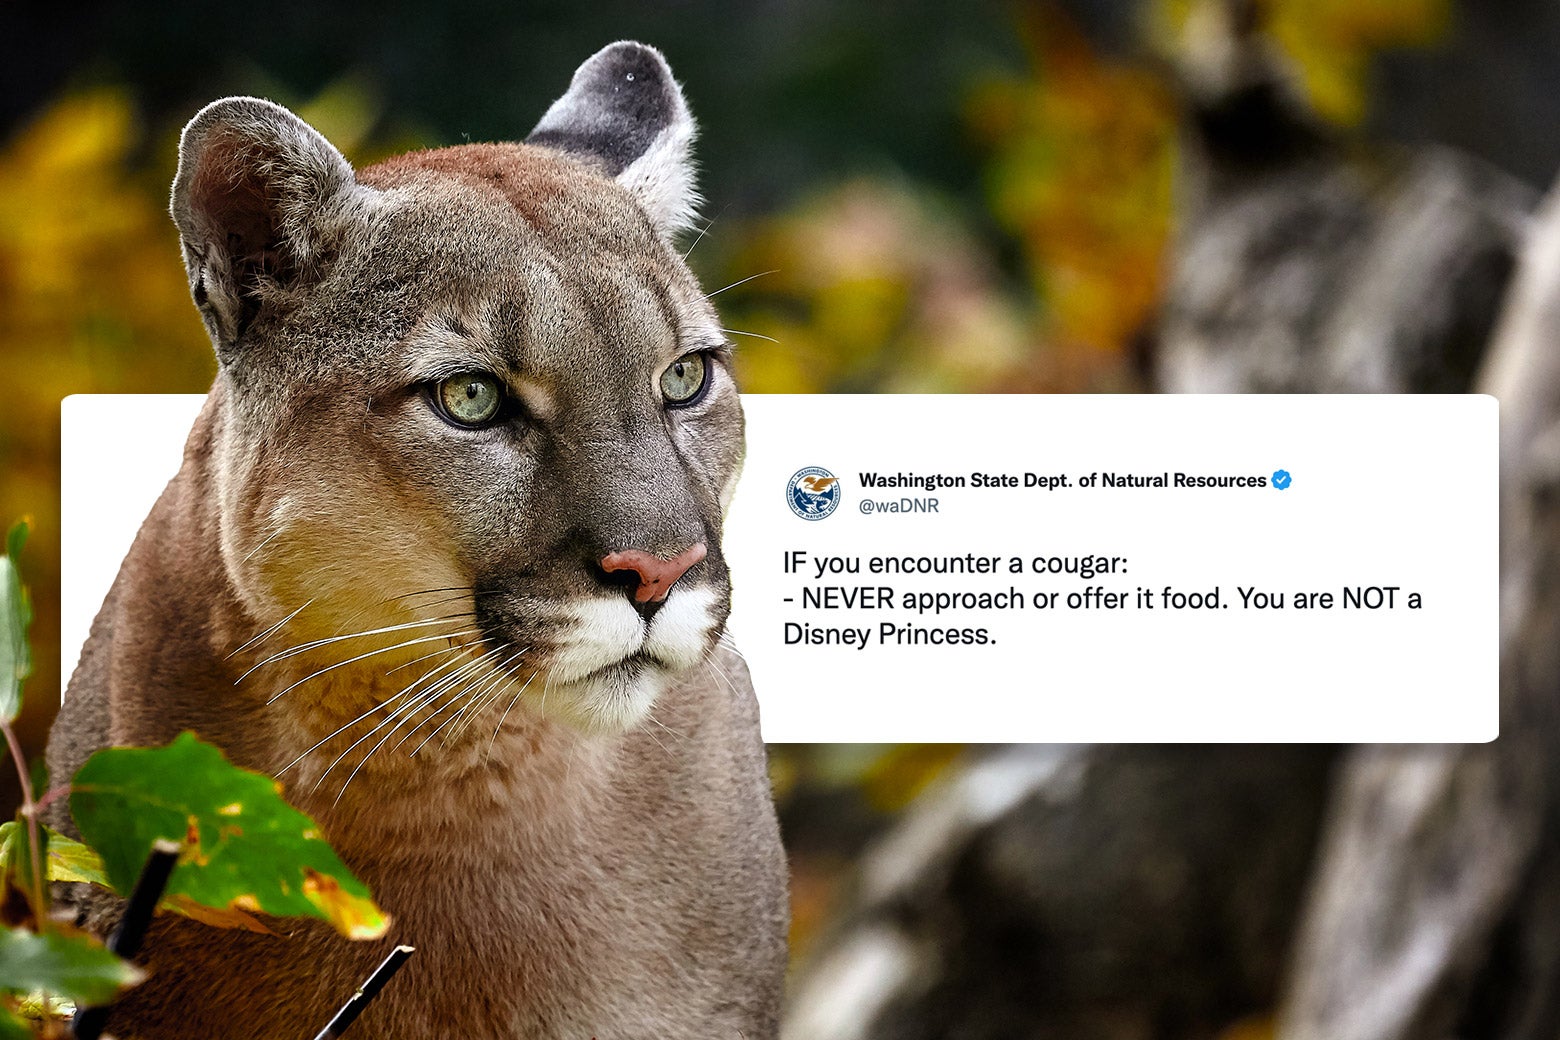 A mountain lion in the wilderness next to a wildlife agency tweet warning not to feed it.